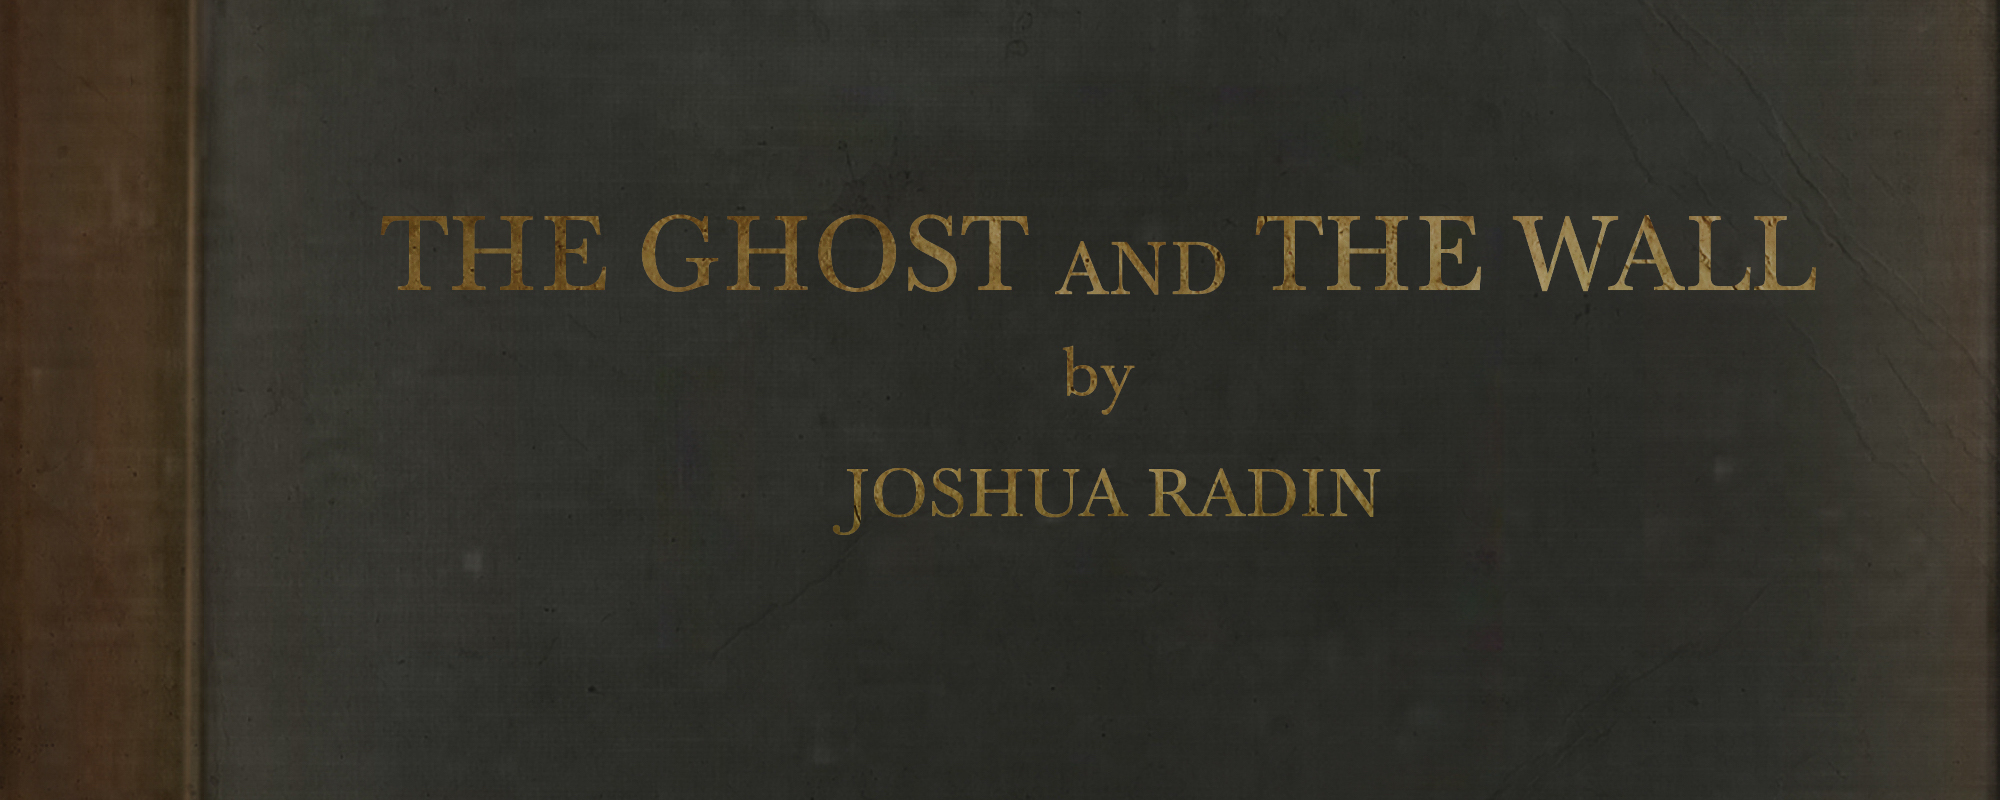 Review:  Joshua Radin Creates an Illuminating Impression on ‘The Ghost and the Wall’